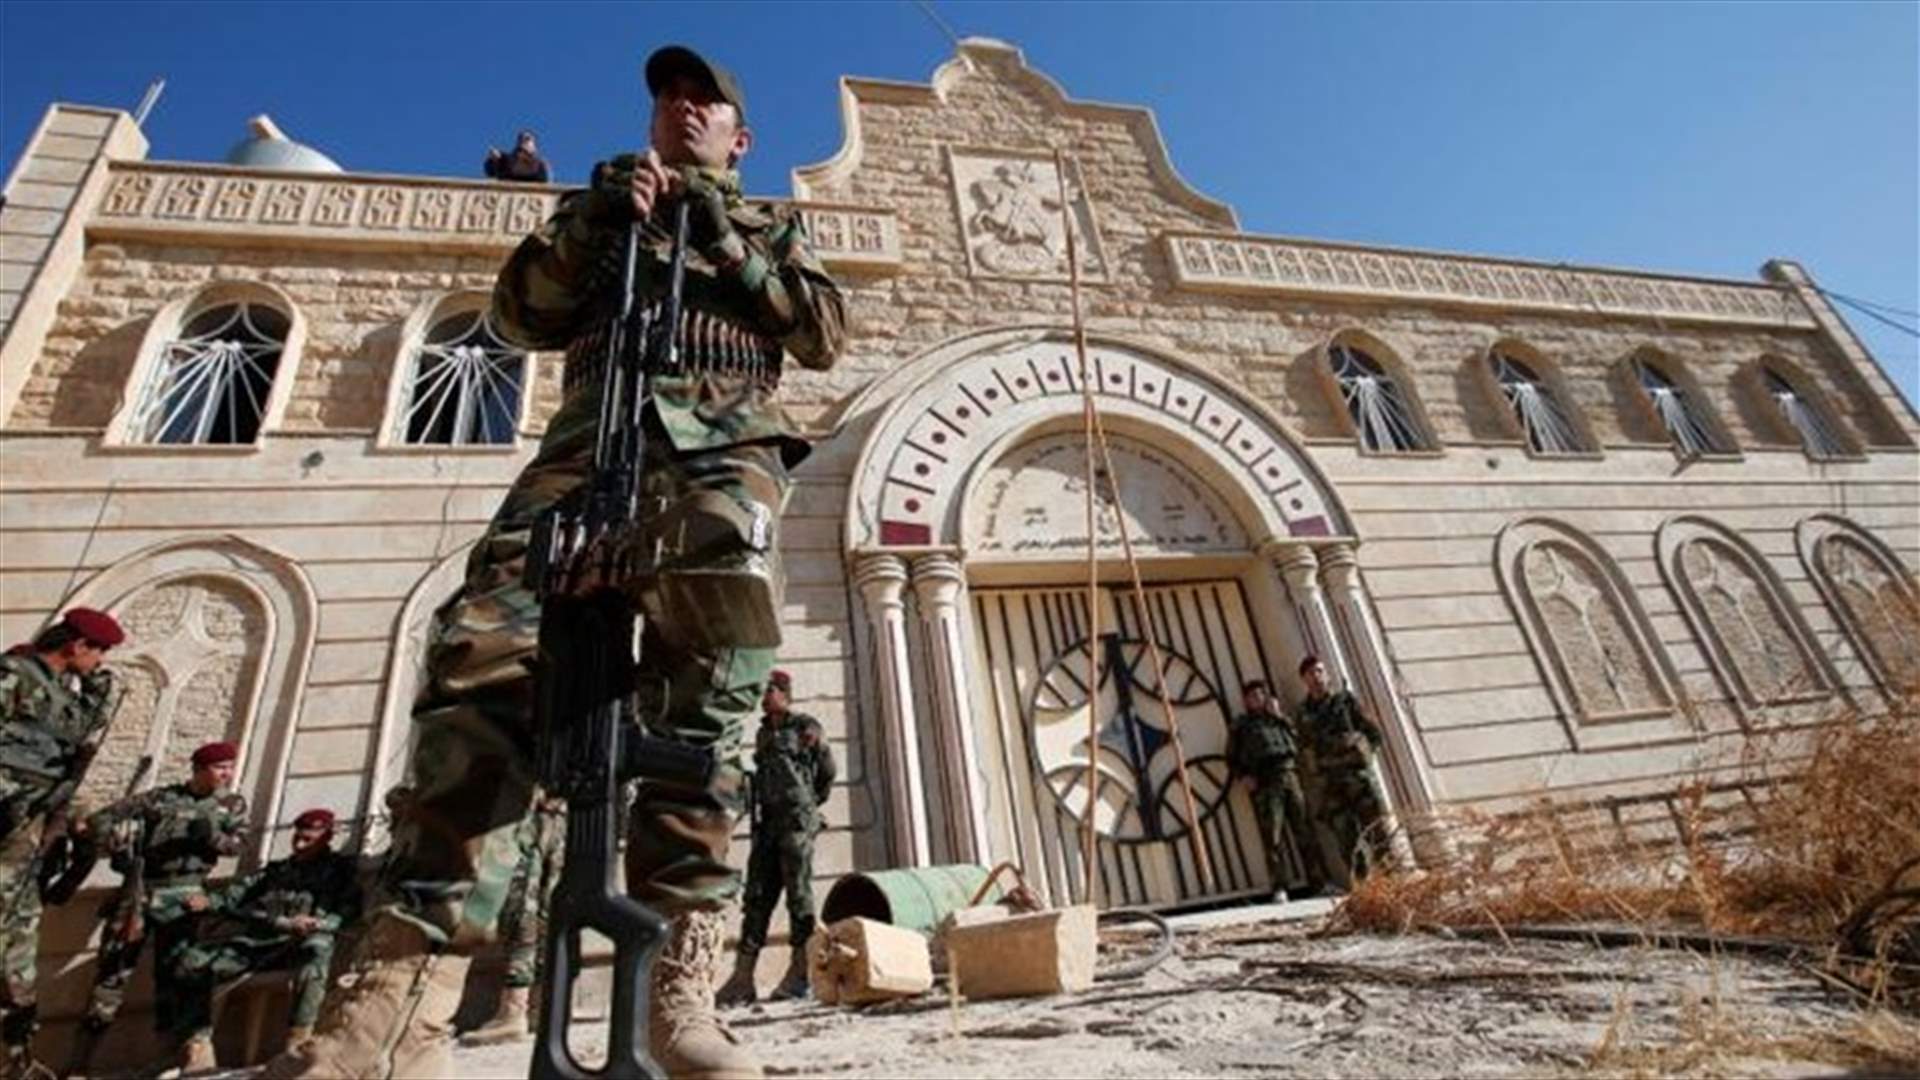 Church in northern Iraq reopened after two years under IS control